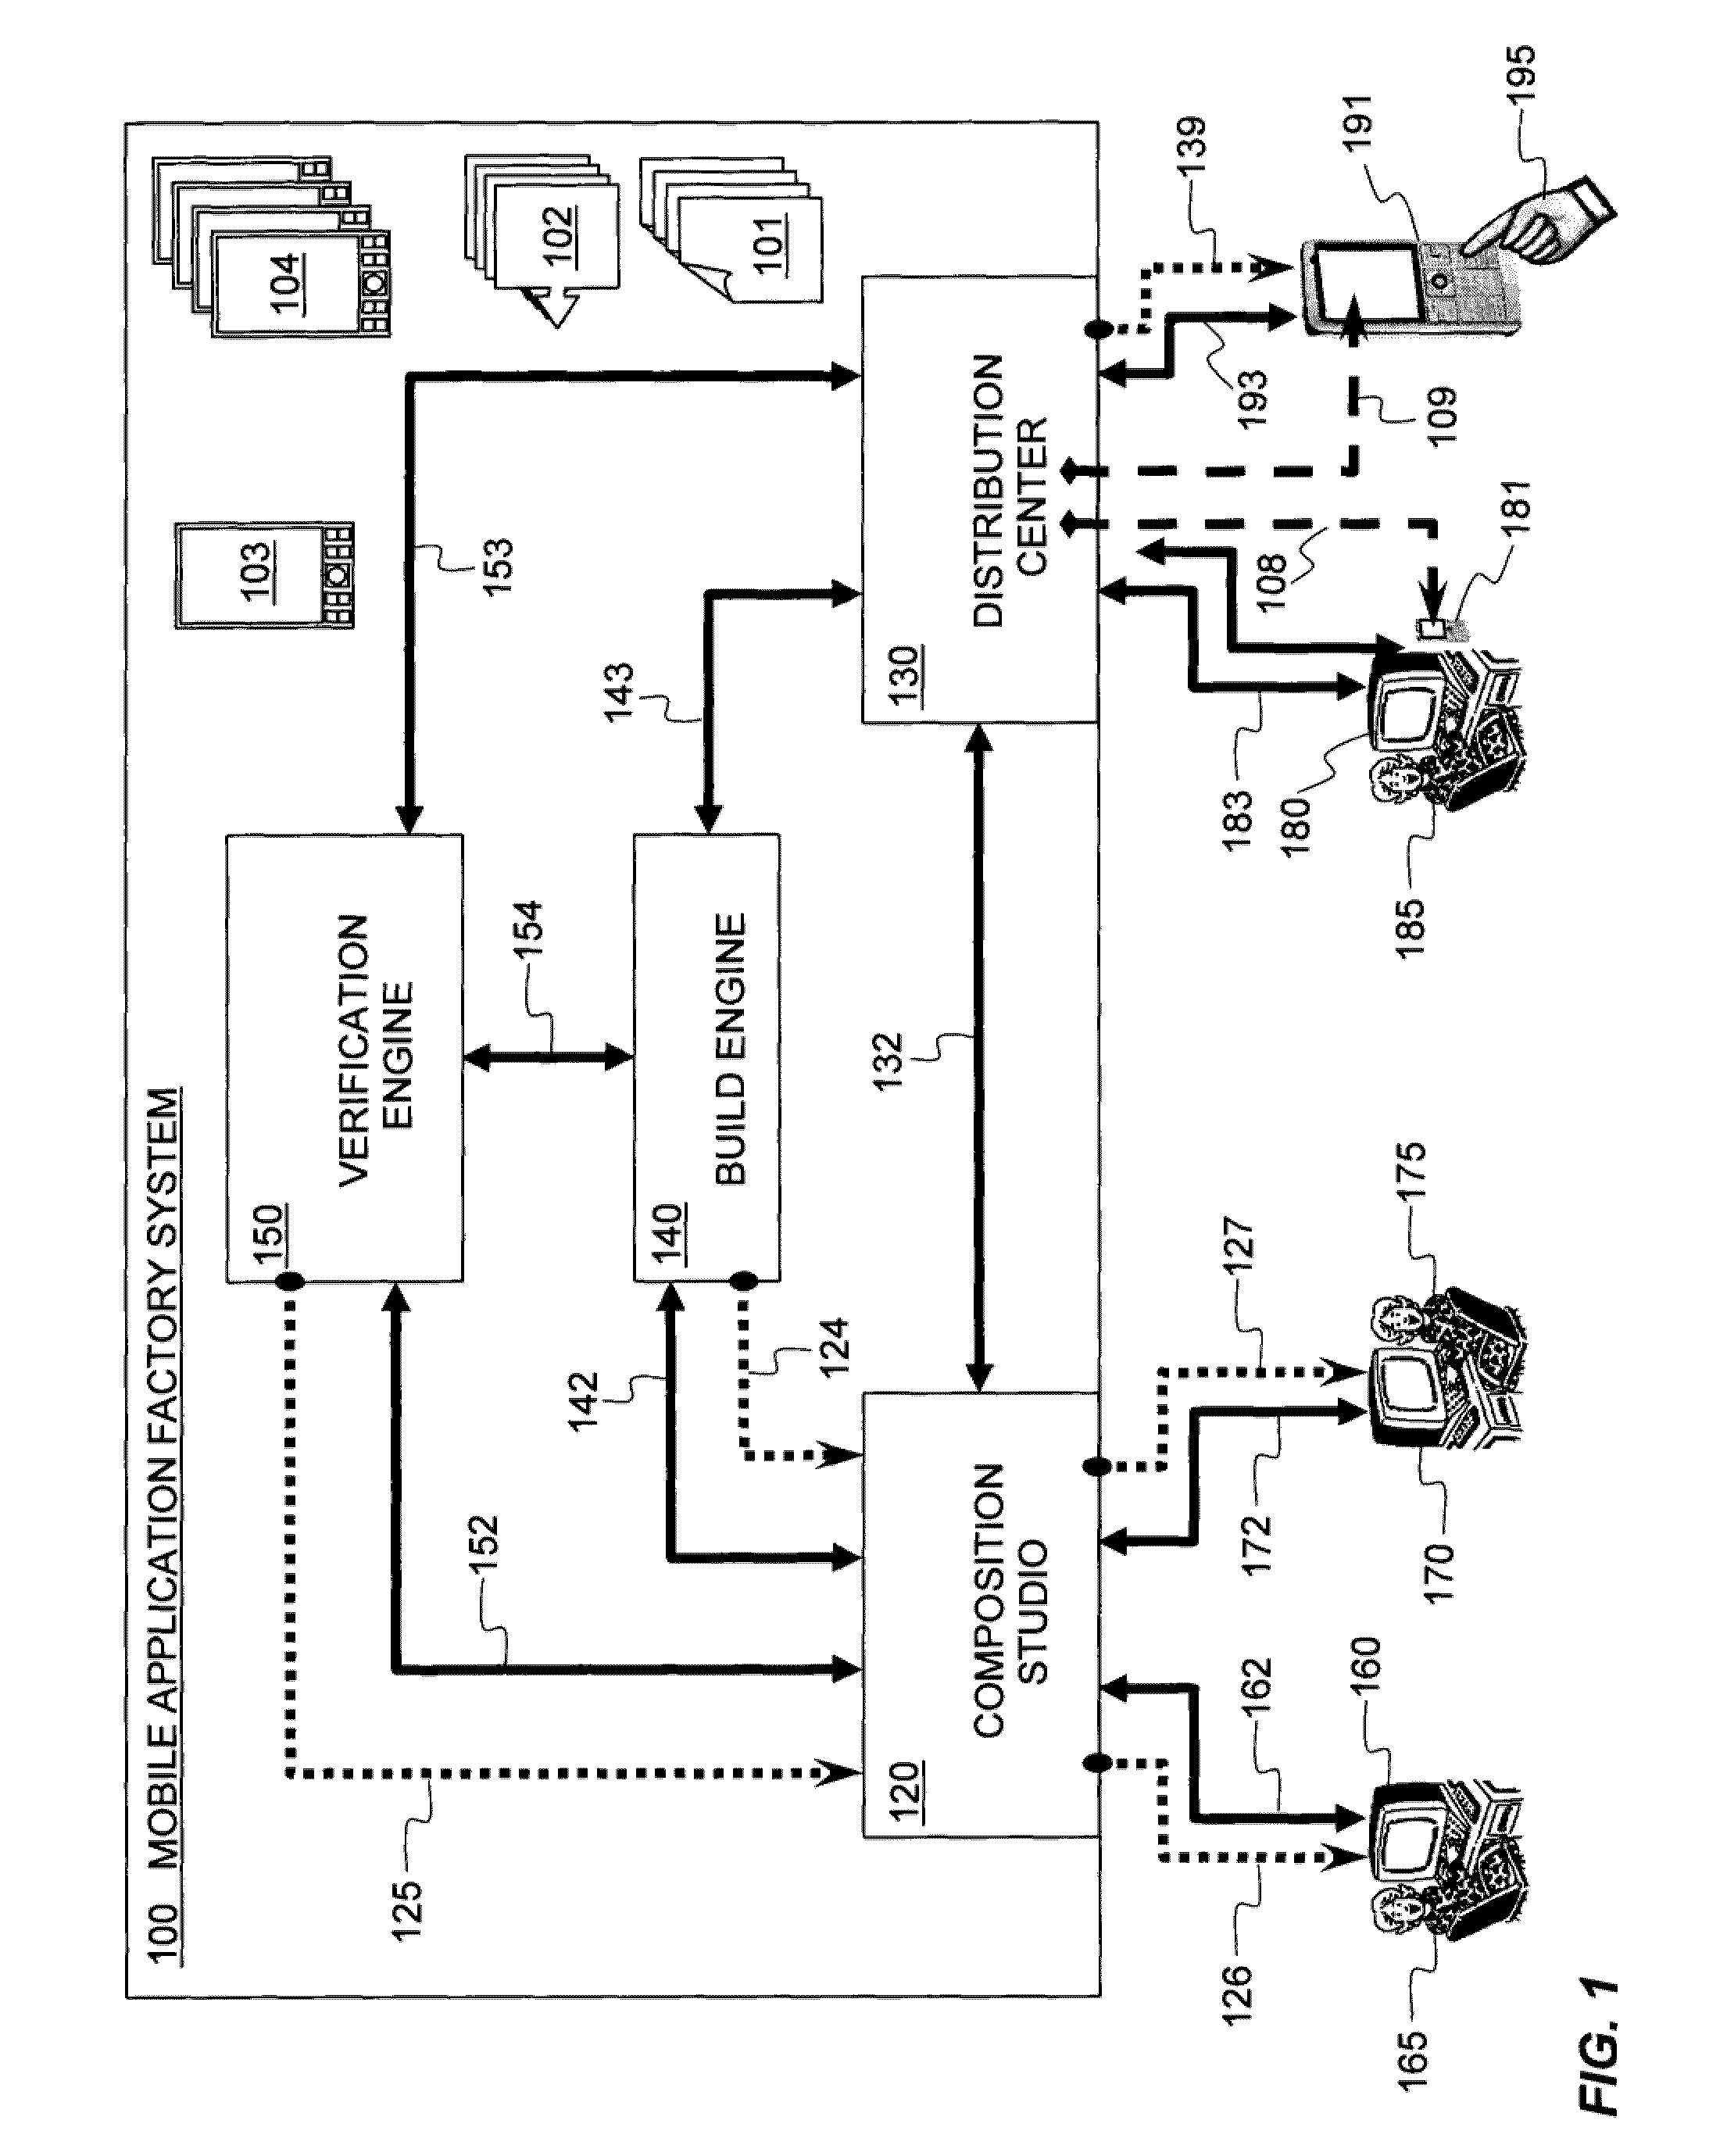 System for creation and distribution of software applications usable on multiple mobile device platforms